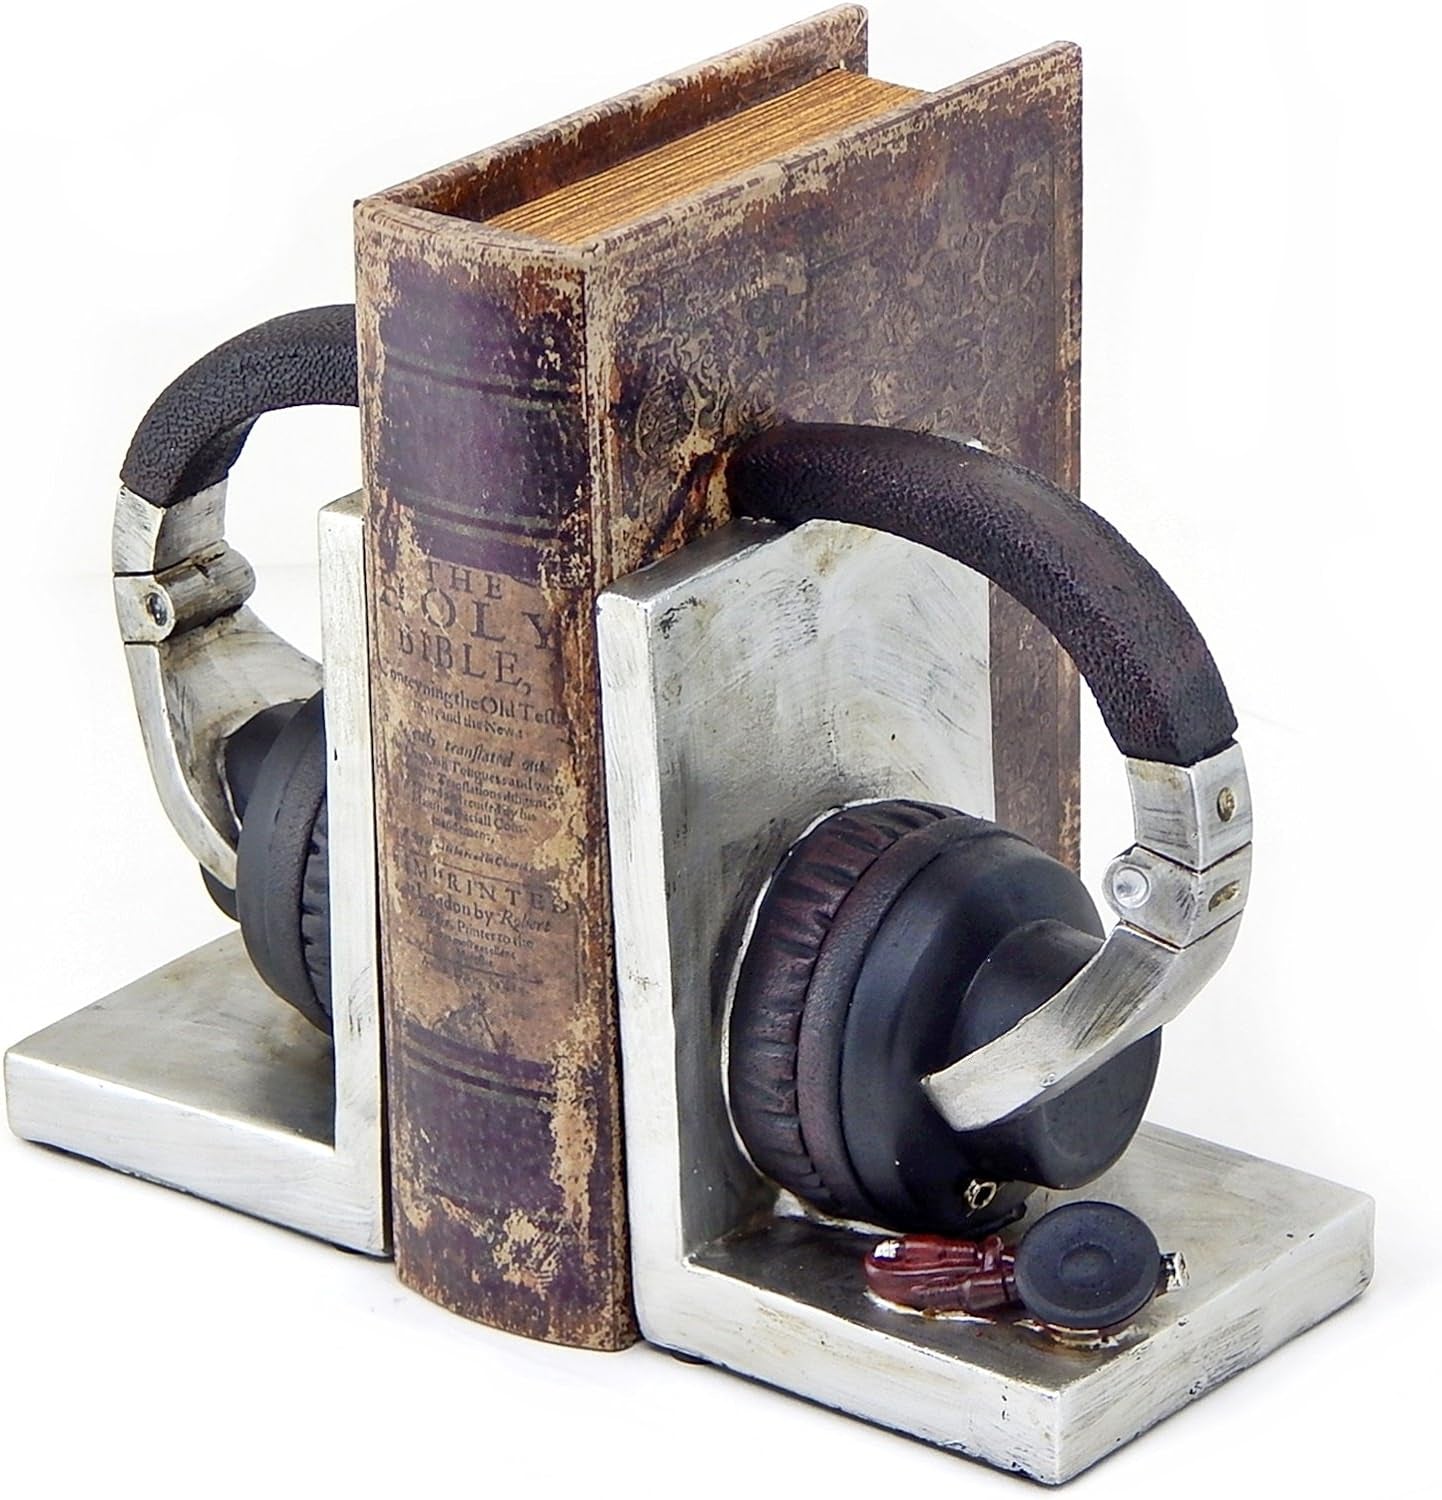 26256 Decorative Bookends Headphone Book Ends Music Lover Vintage Book Ends Holder Heavy Stoppers Bookshelf Shelves to Hold Books Library Shelf Dividers Home Decor 6 Inch Tall